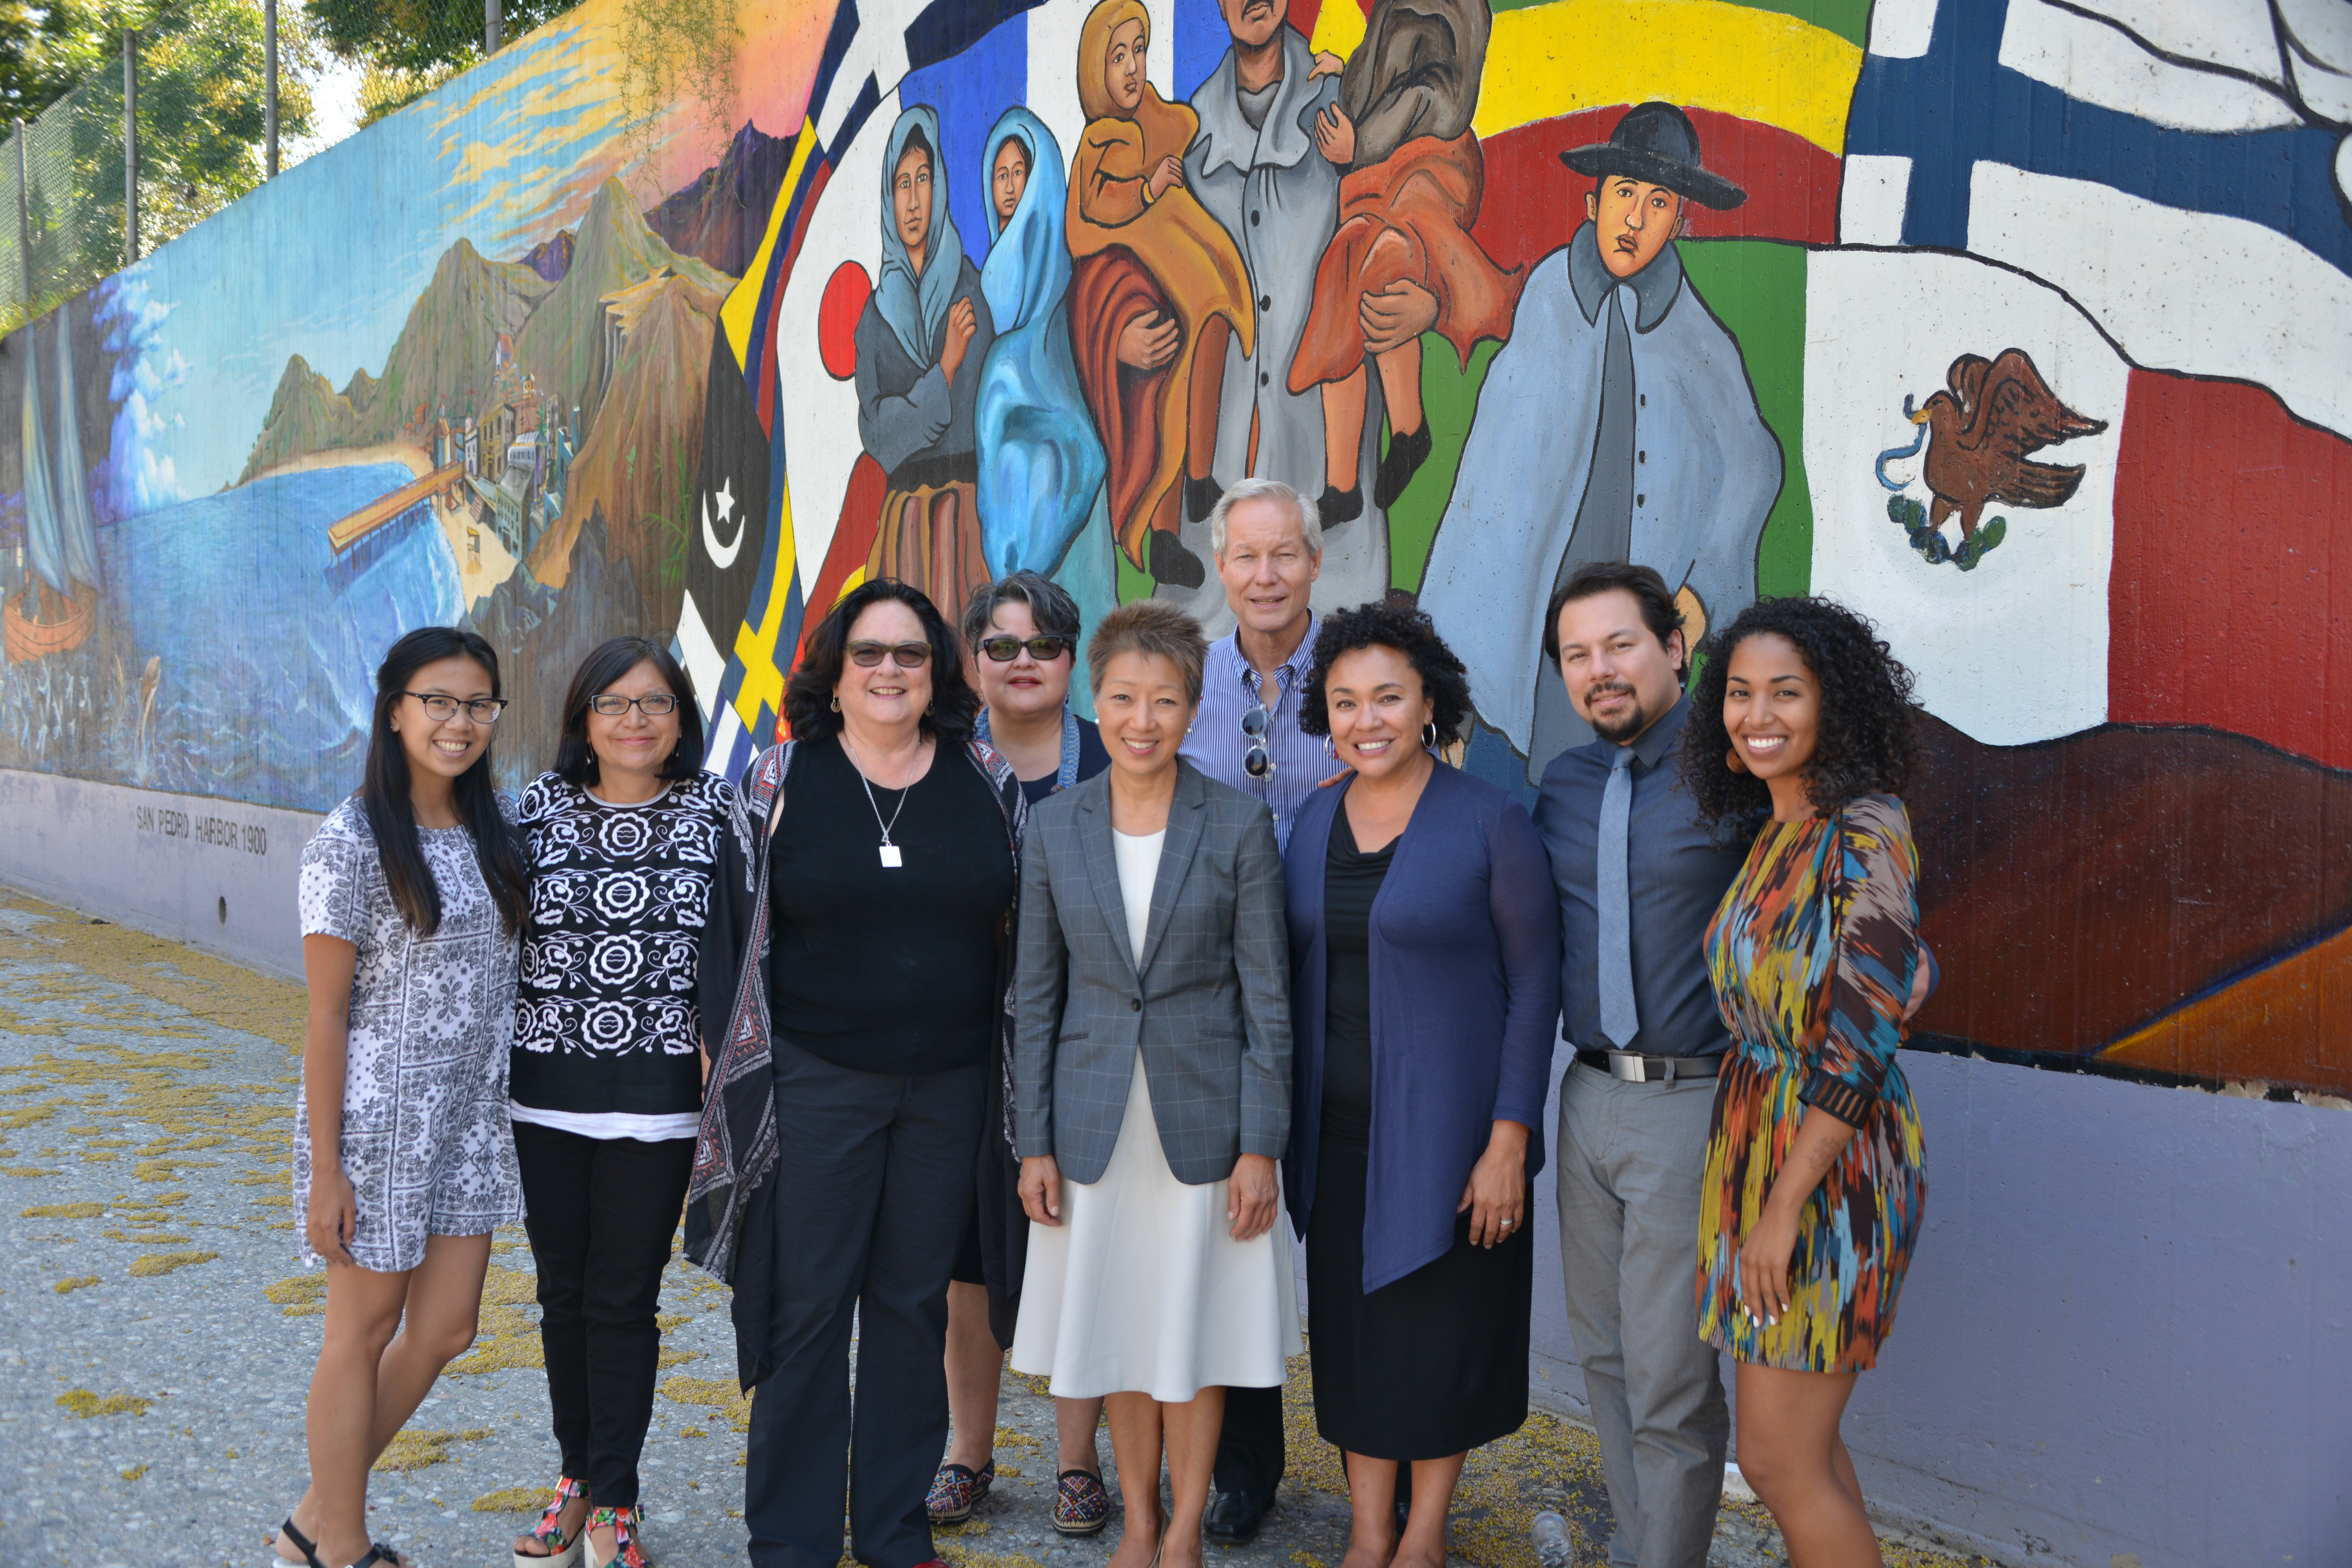 National Endowment for the Arts Chairman Jane Chu visits The Great Wall of Los Angeles